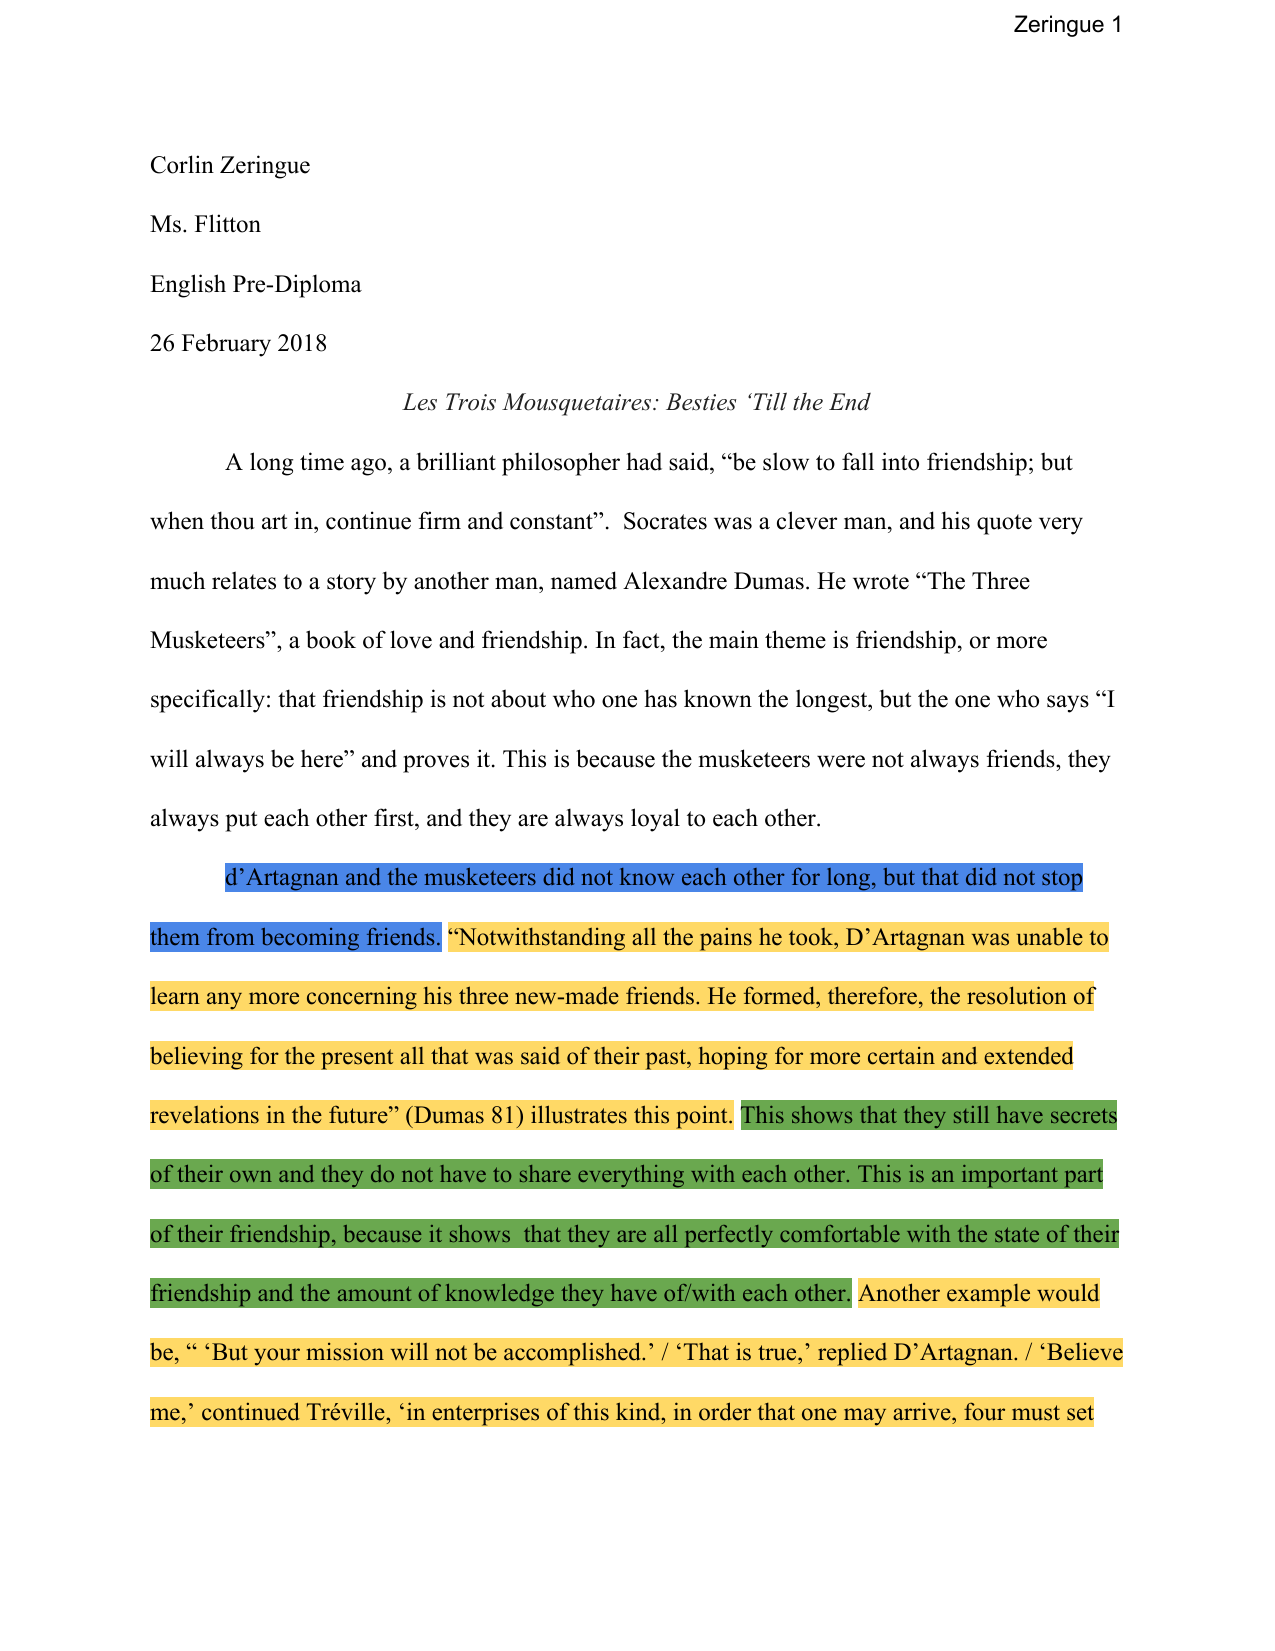 the three musketeers book review essay sample